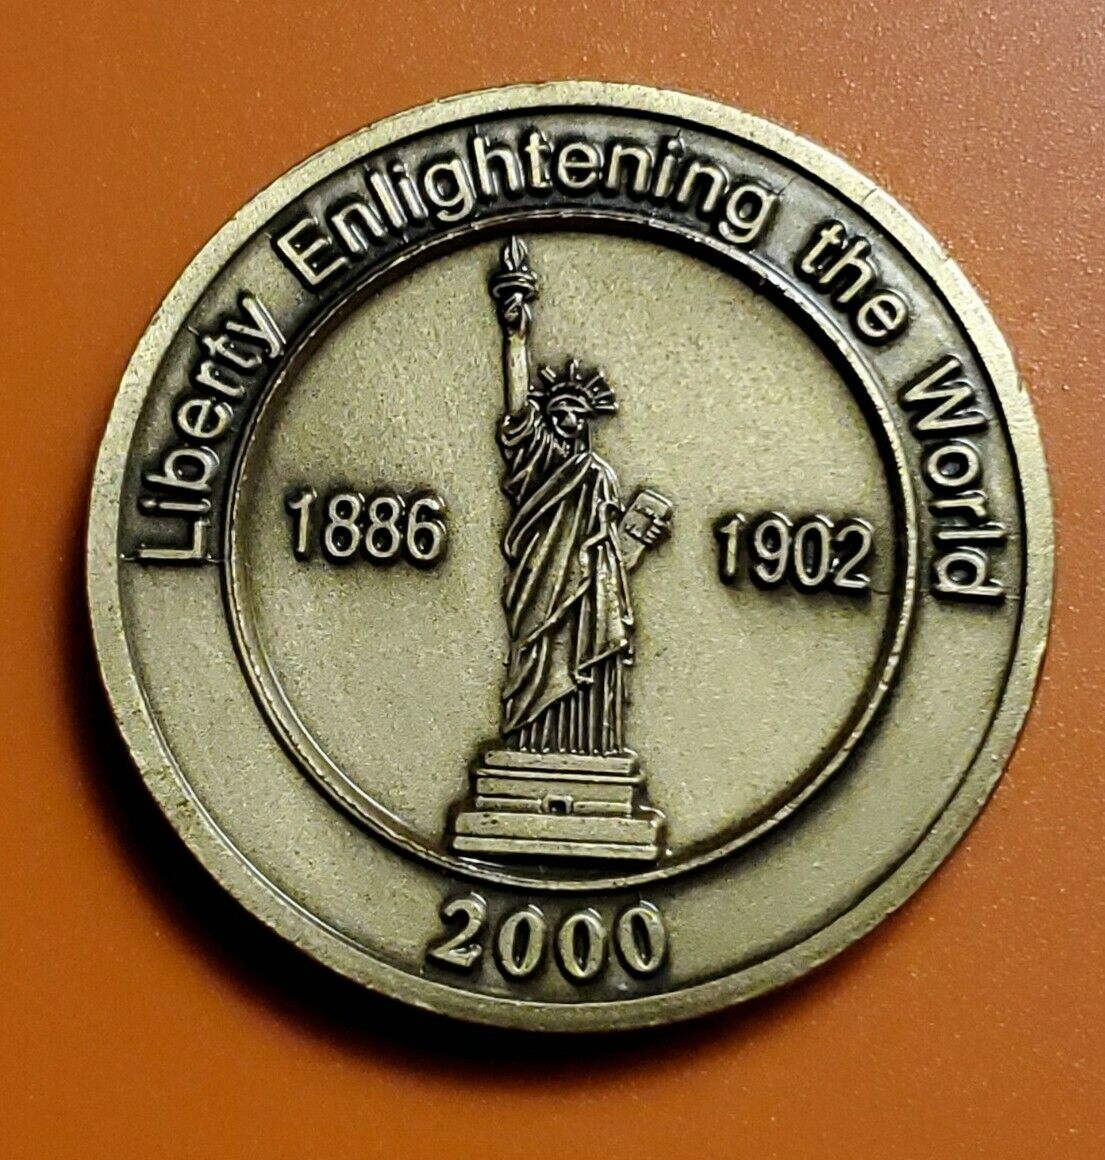 Harbour Lights Coin 2000 Liberty Enlightening the World 1886-1902 